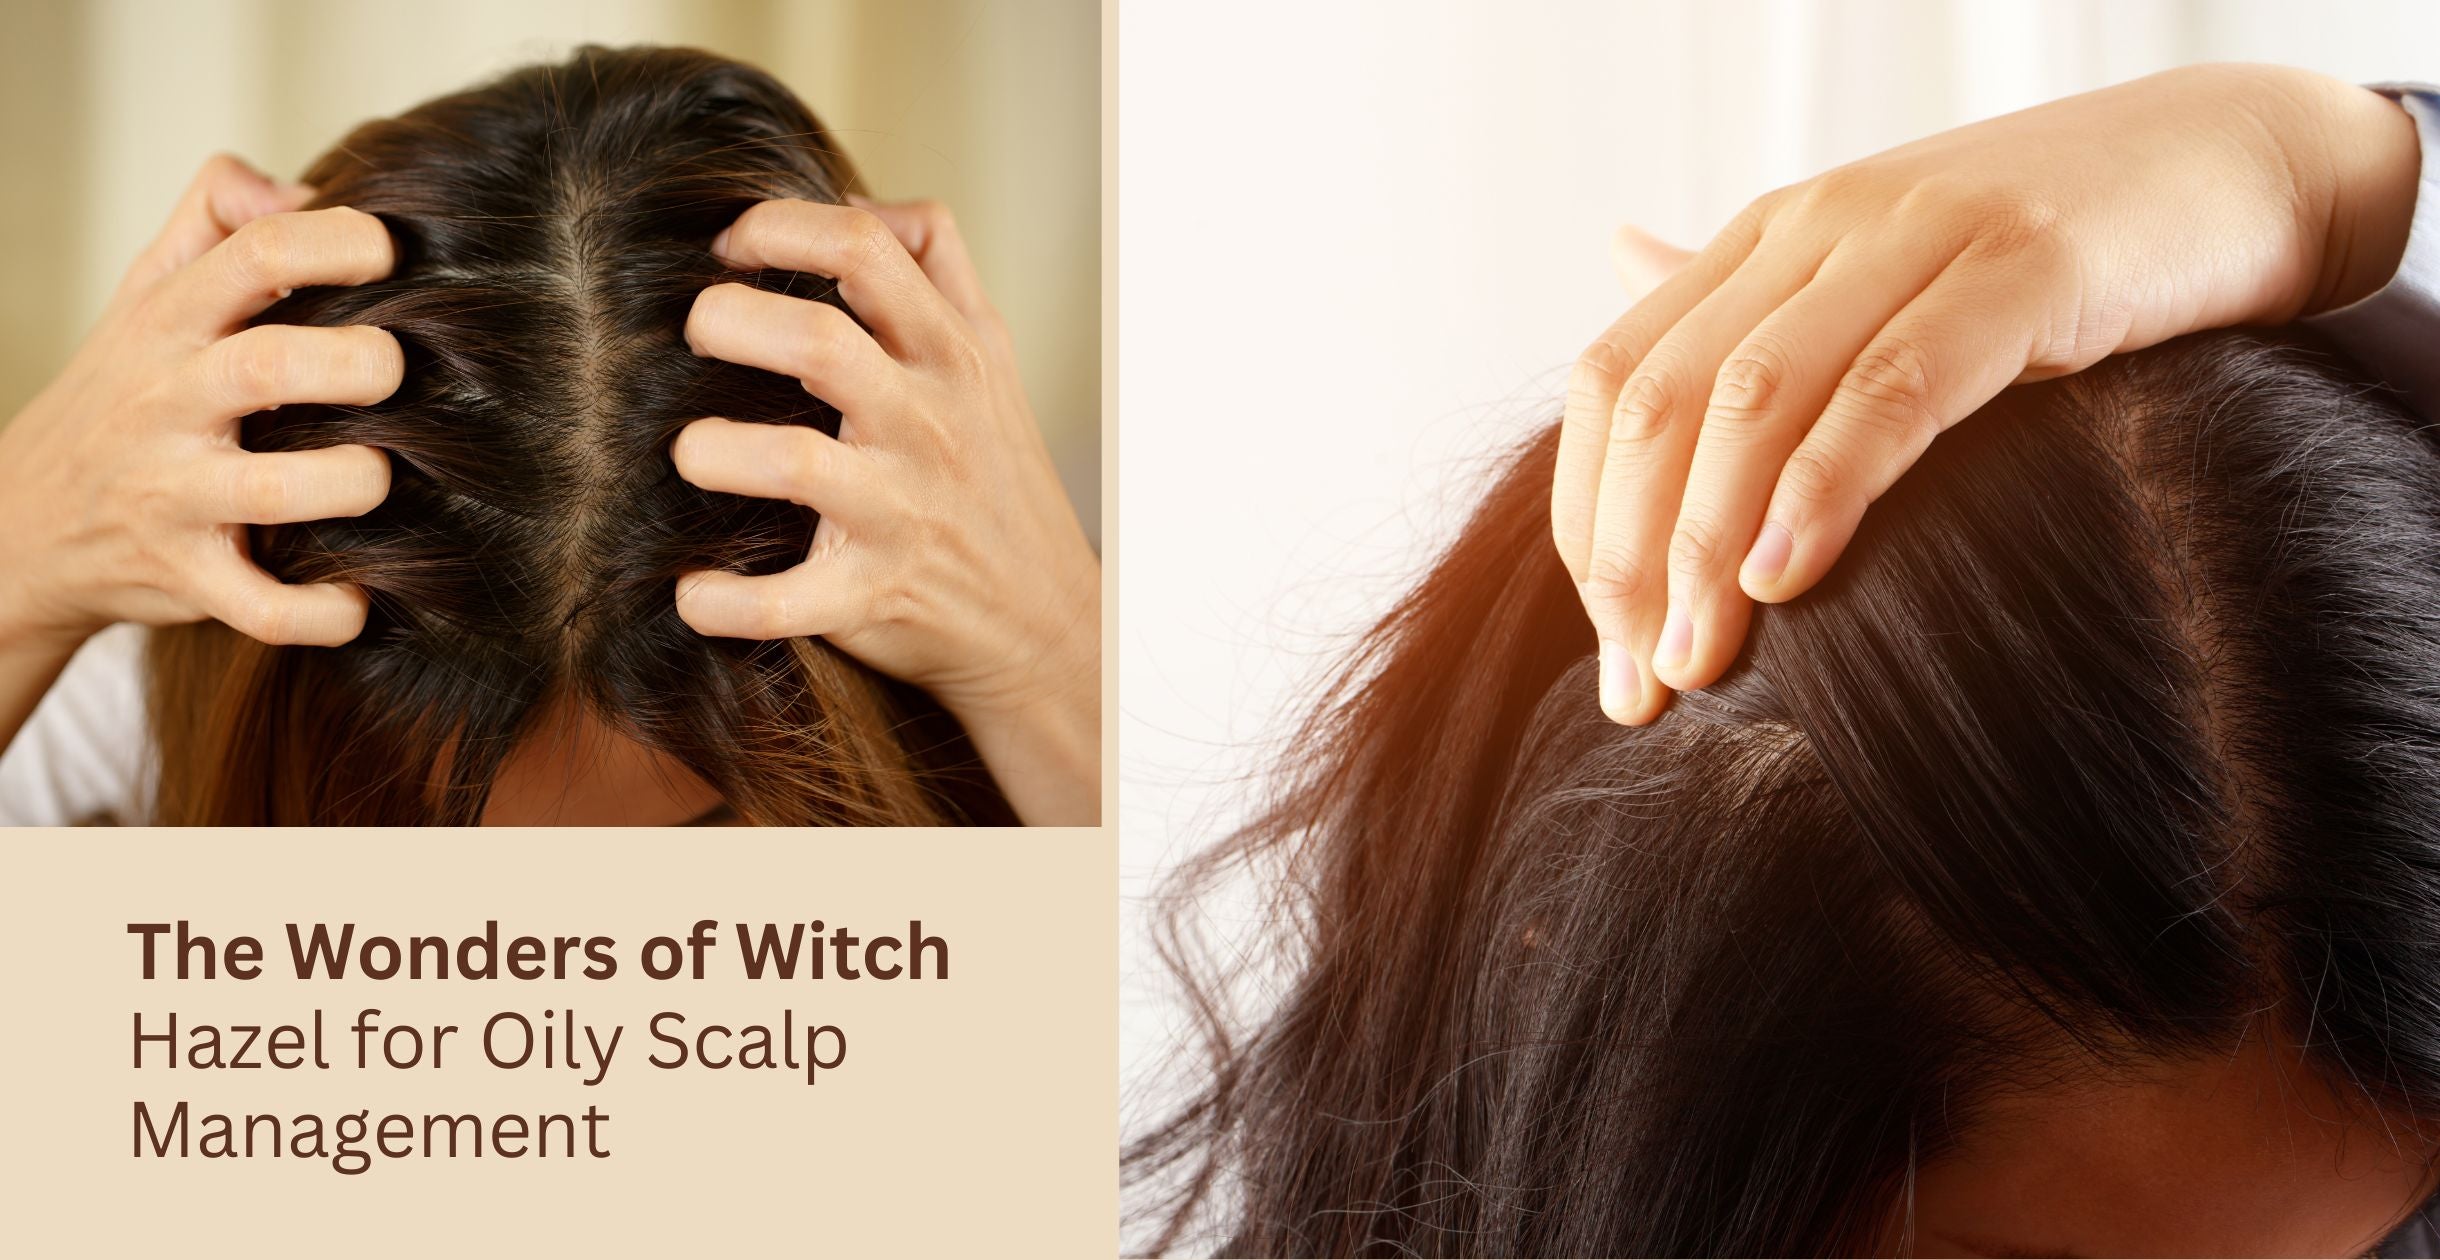 The Wonders of Witch Hazel for Oily Scalp Management